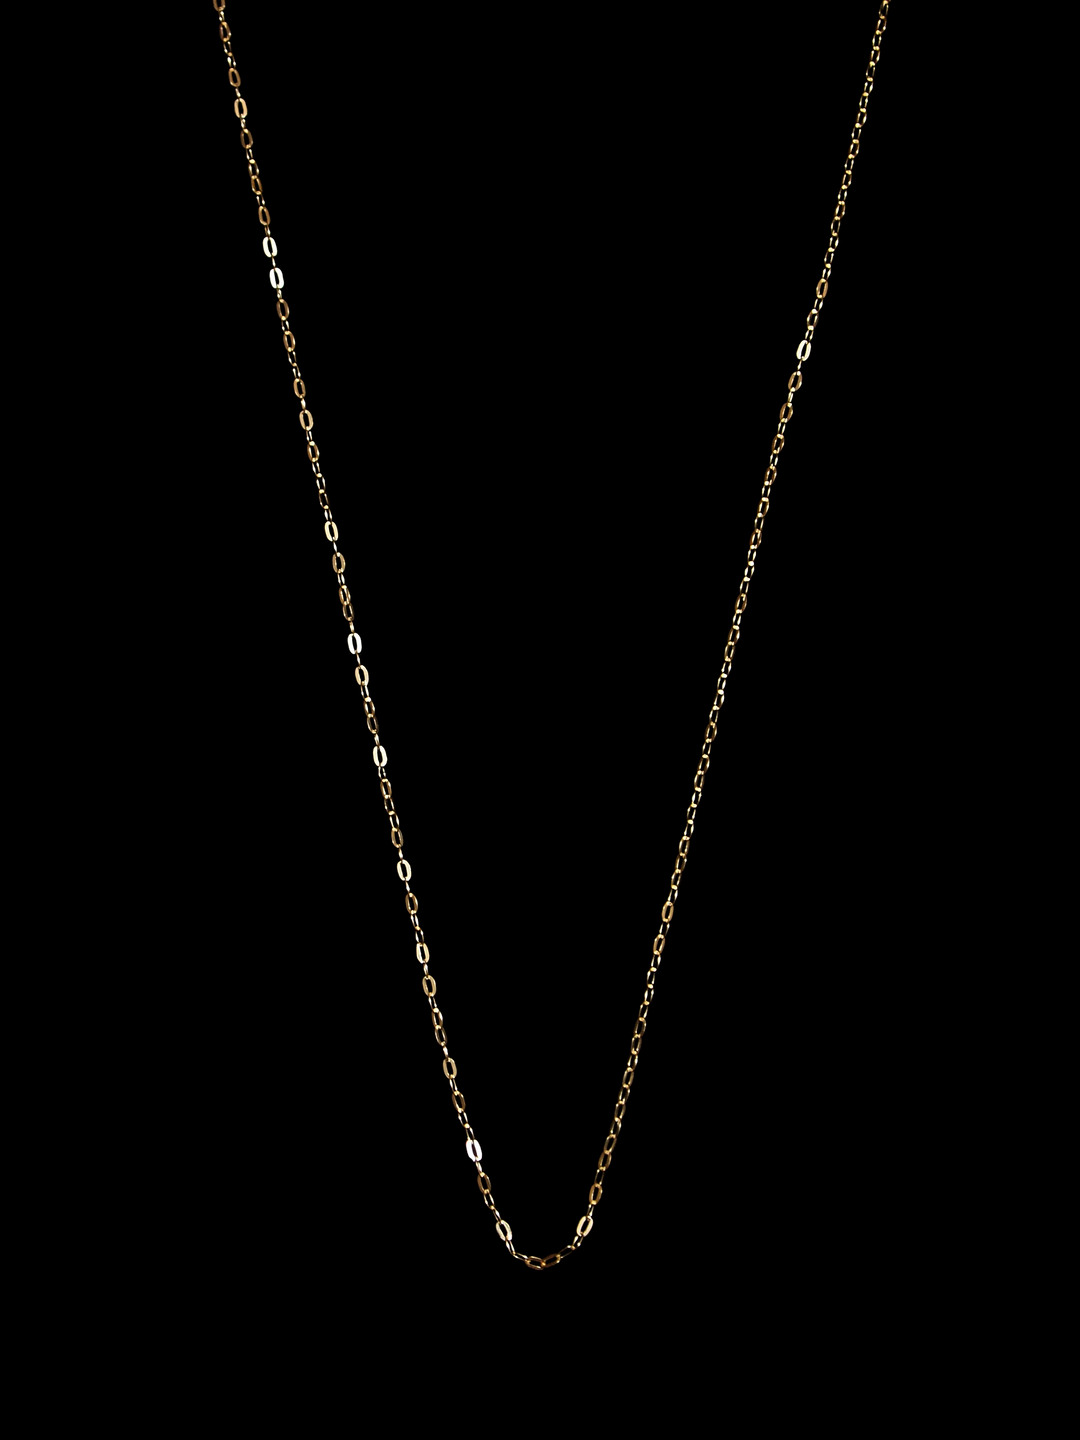 [iErté] "Harold" Chain Necklace 40cm / ハロルド チェーン ネックレス